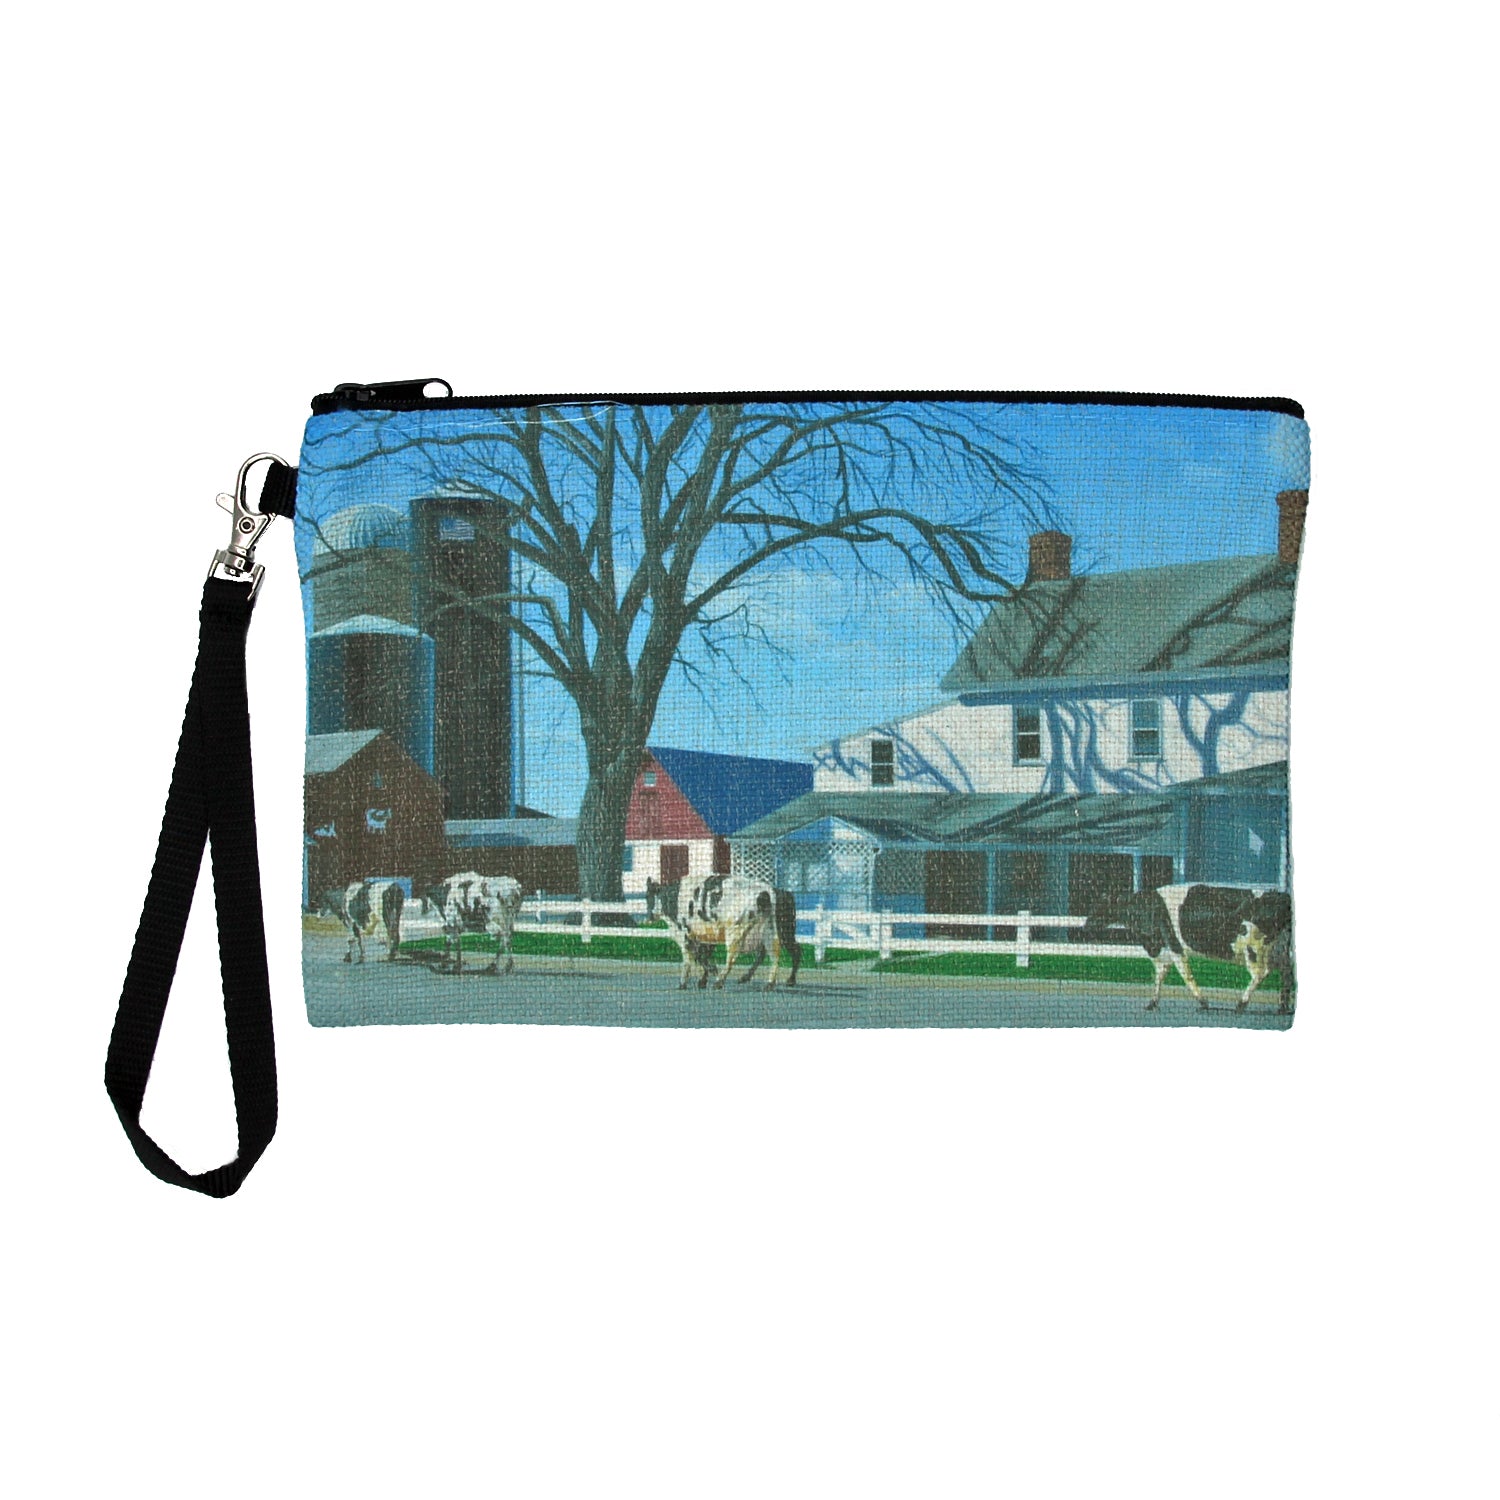 Caught in a Country Moment Clutch Bag